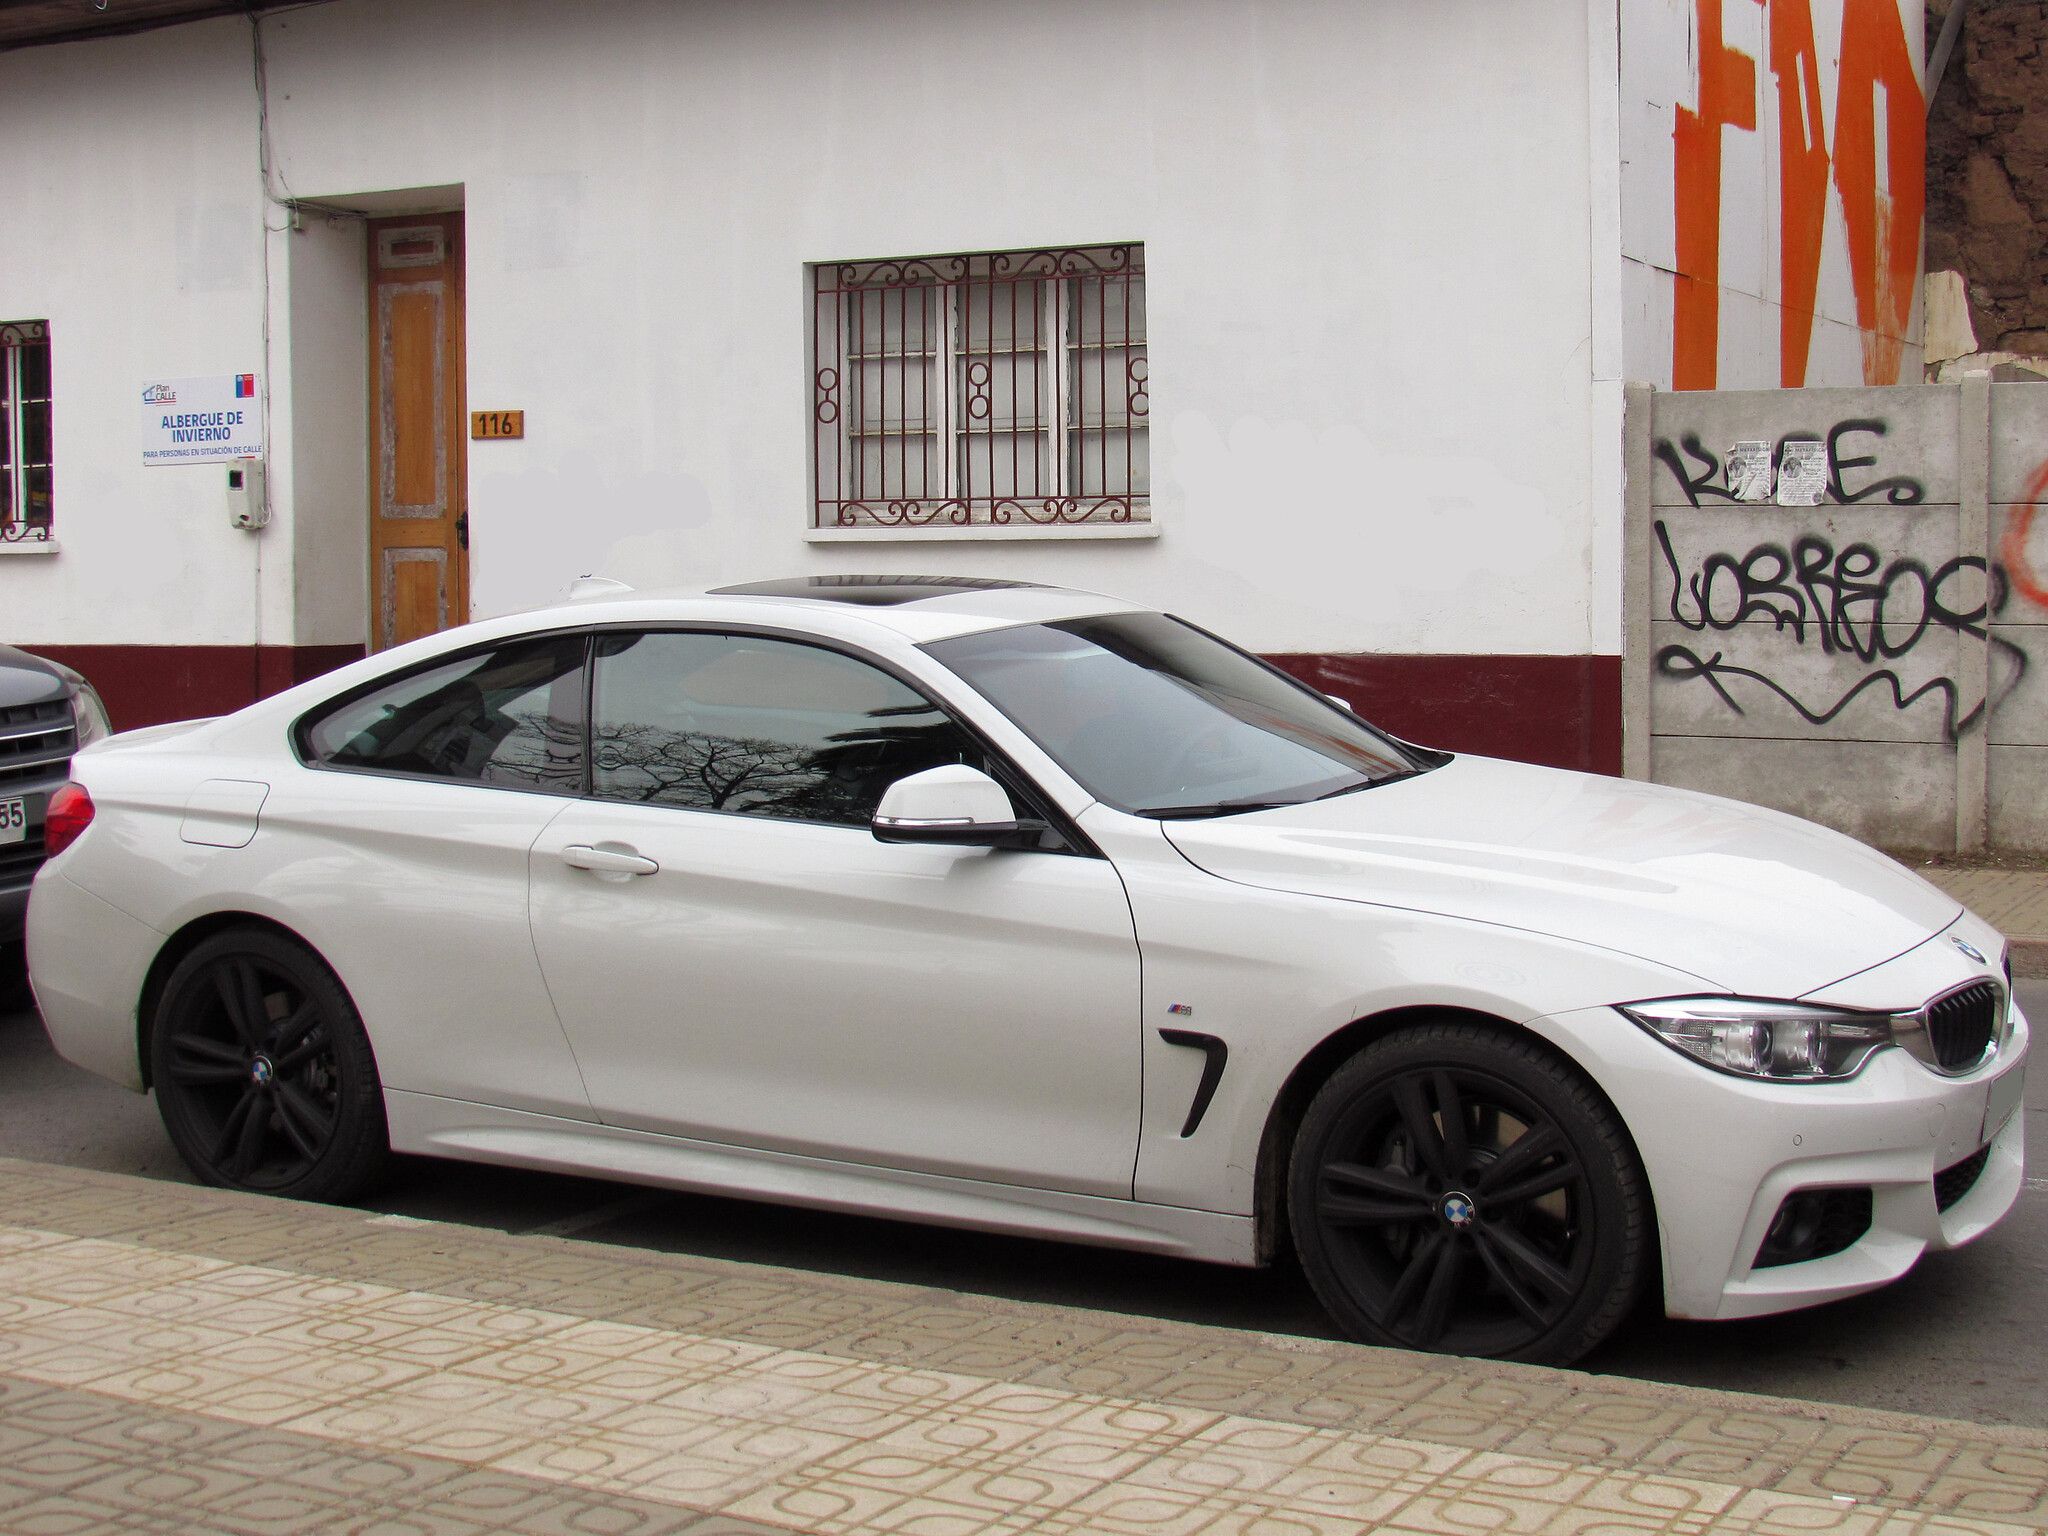 2014 BMW 4 Series Coupe in white